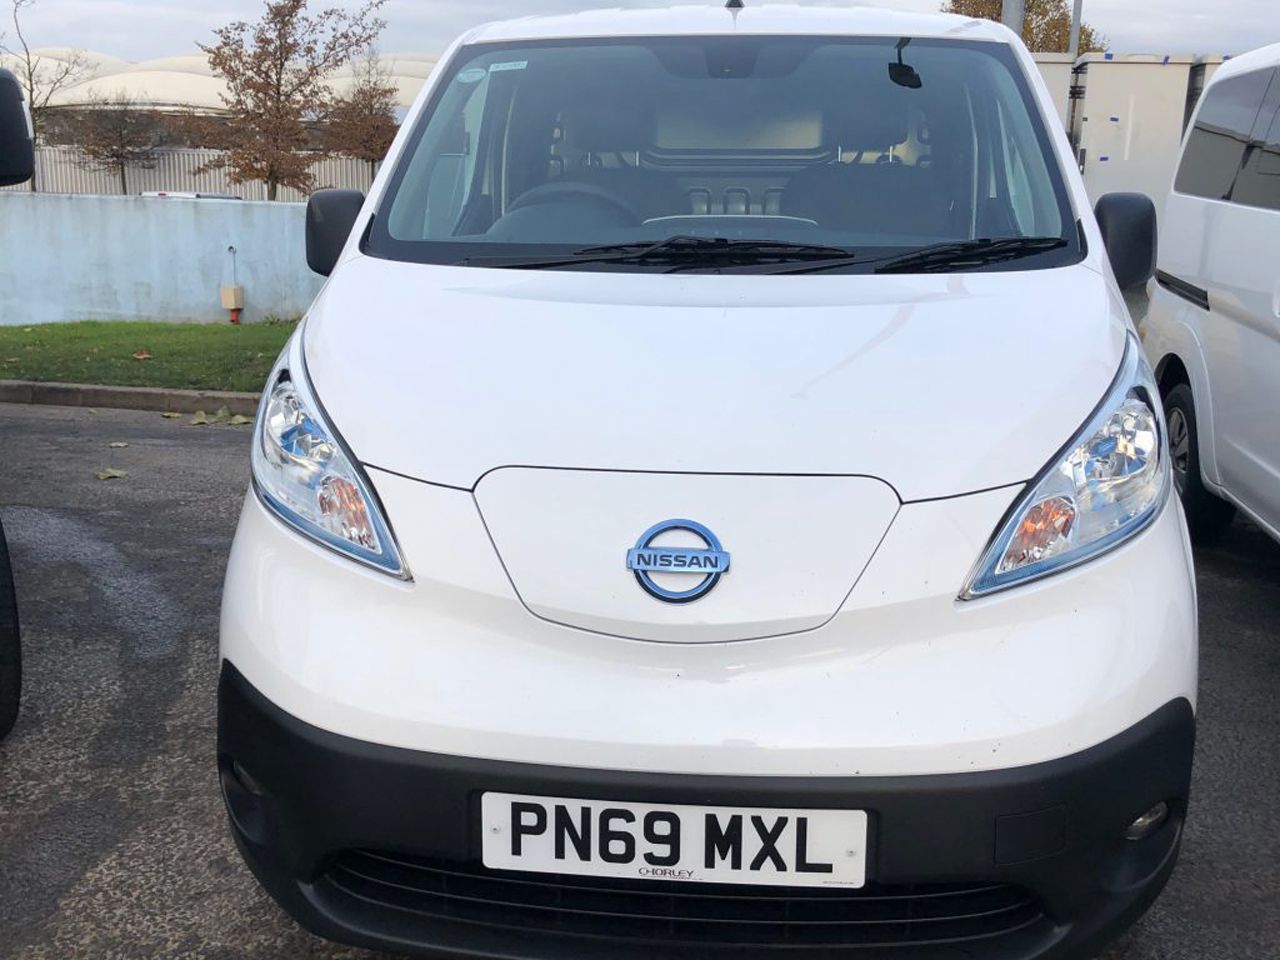 Nissan E-nv200 Lease Offers